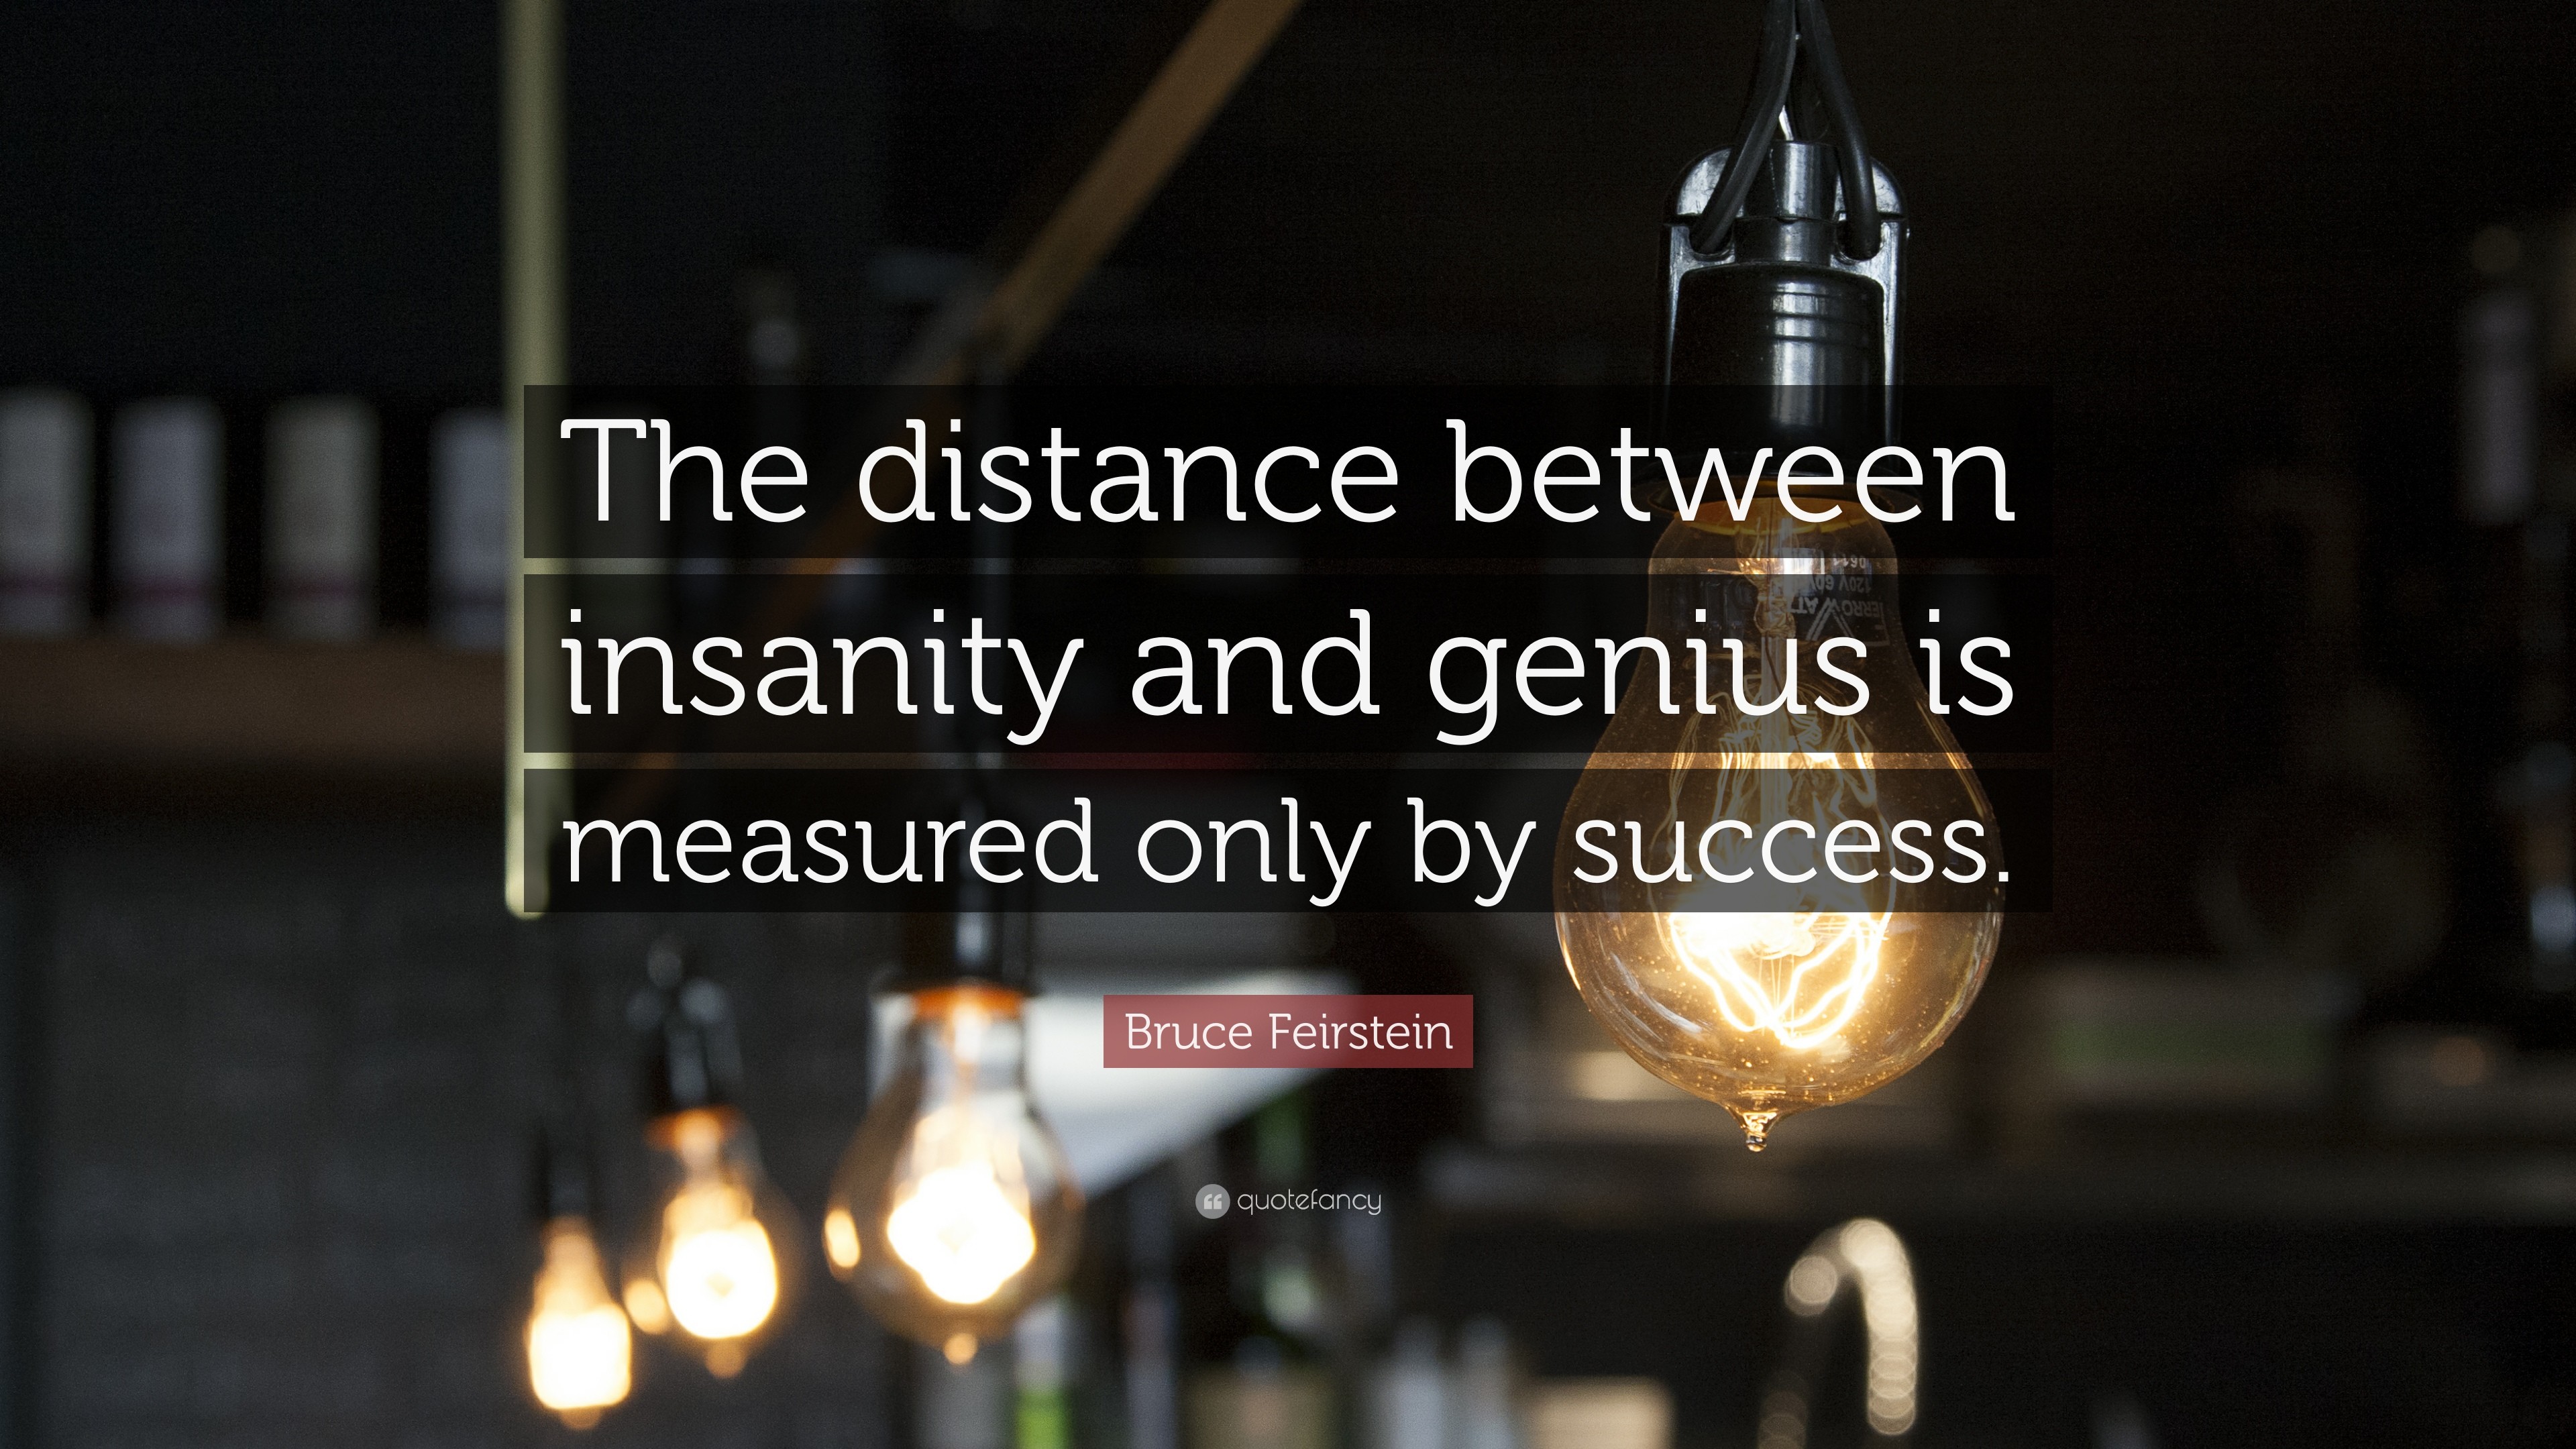 3840x2160 Bruce Feirstein Quote: “The distance between insanity and genius is  measured only by success